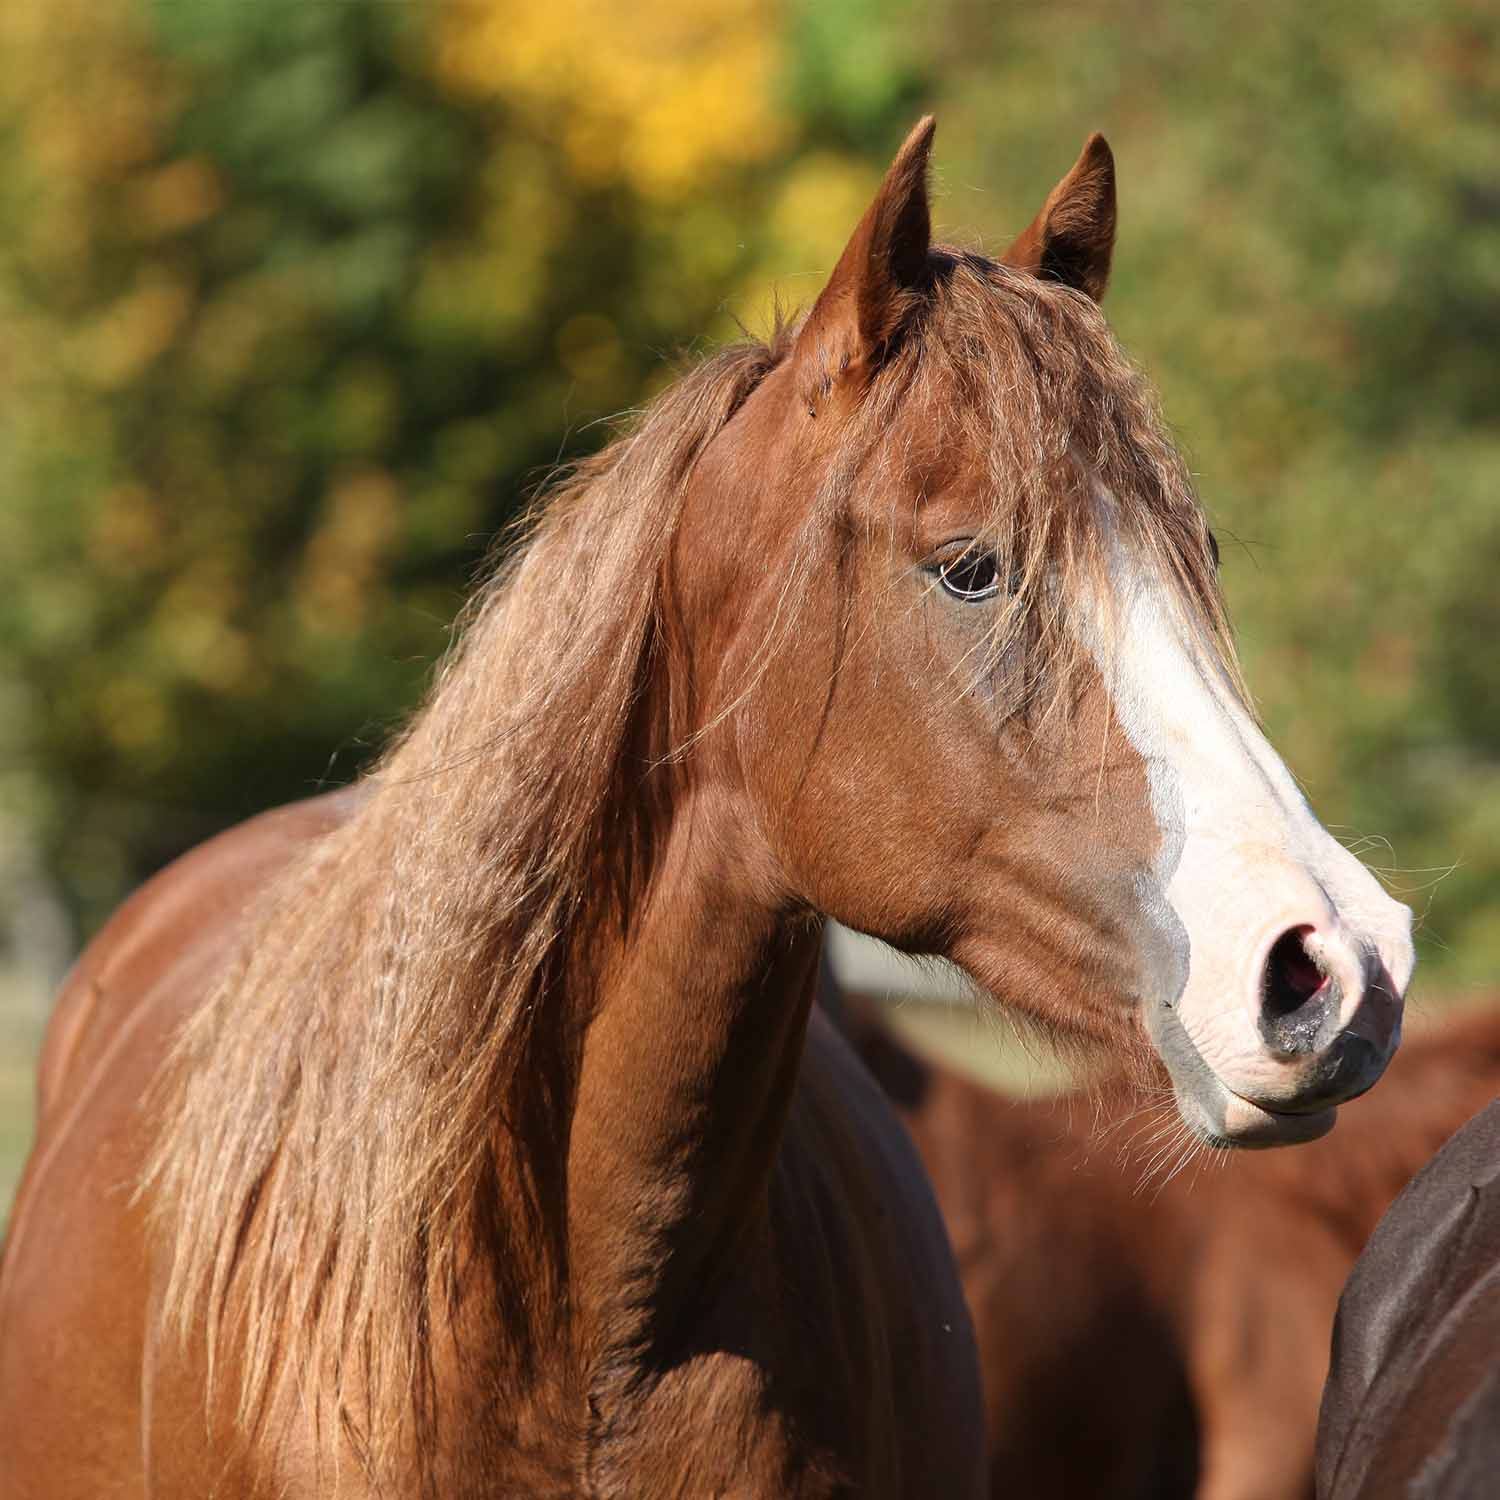 Horse Meat Unfit for Human Consumption Sold, 35 Arrested